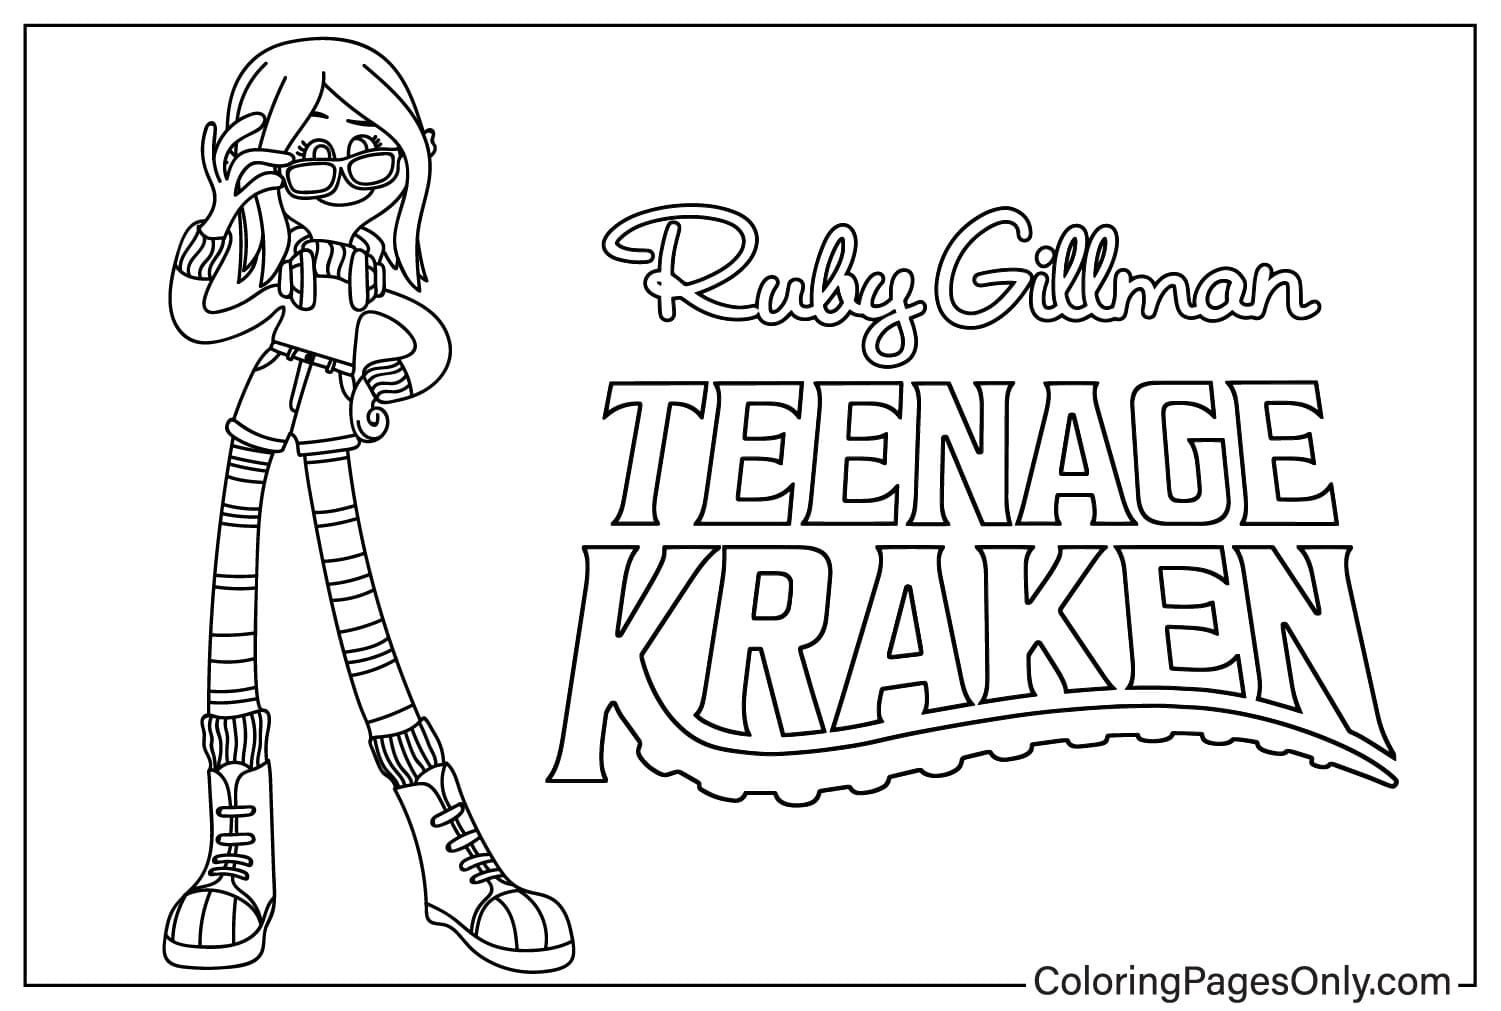 Ruby Gillman Coloring Page from Ruby Gillman Teenage Kraken